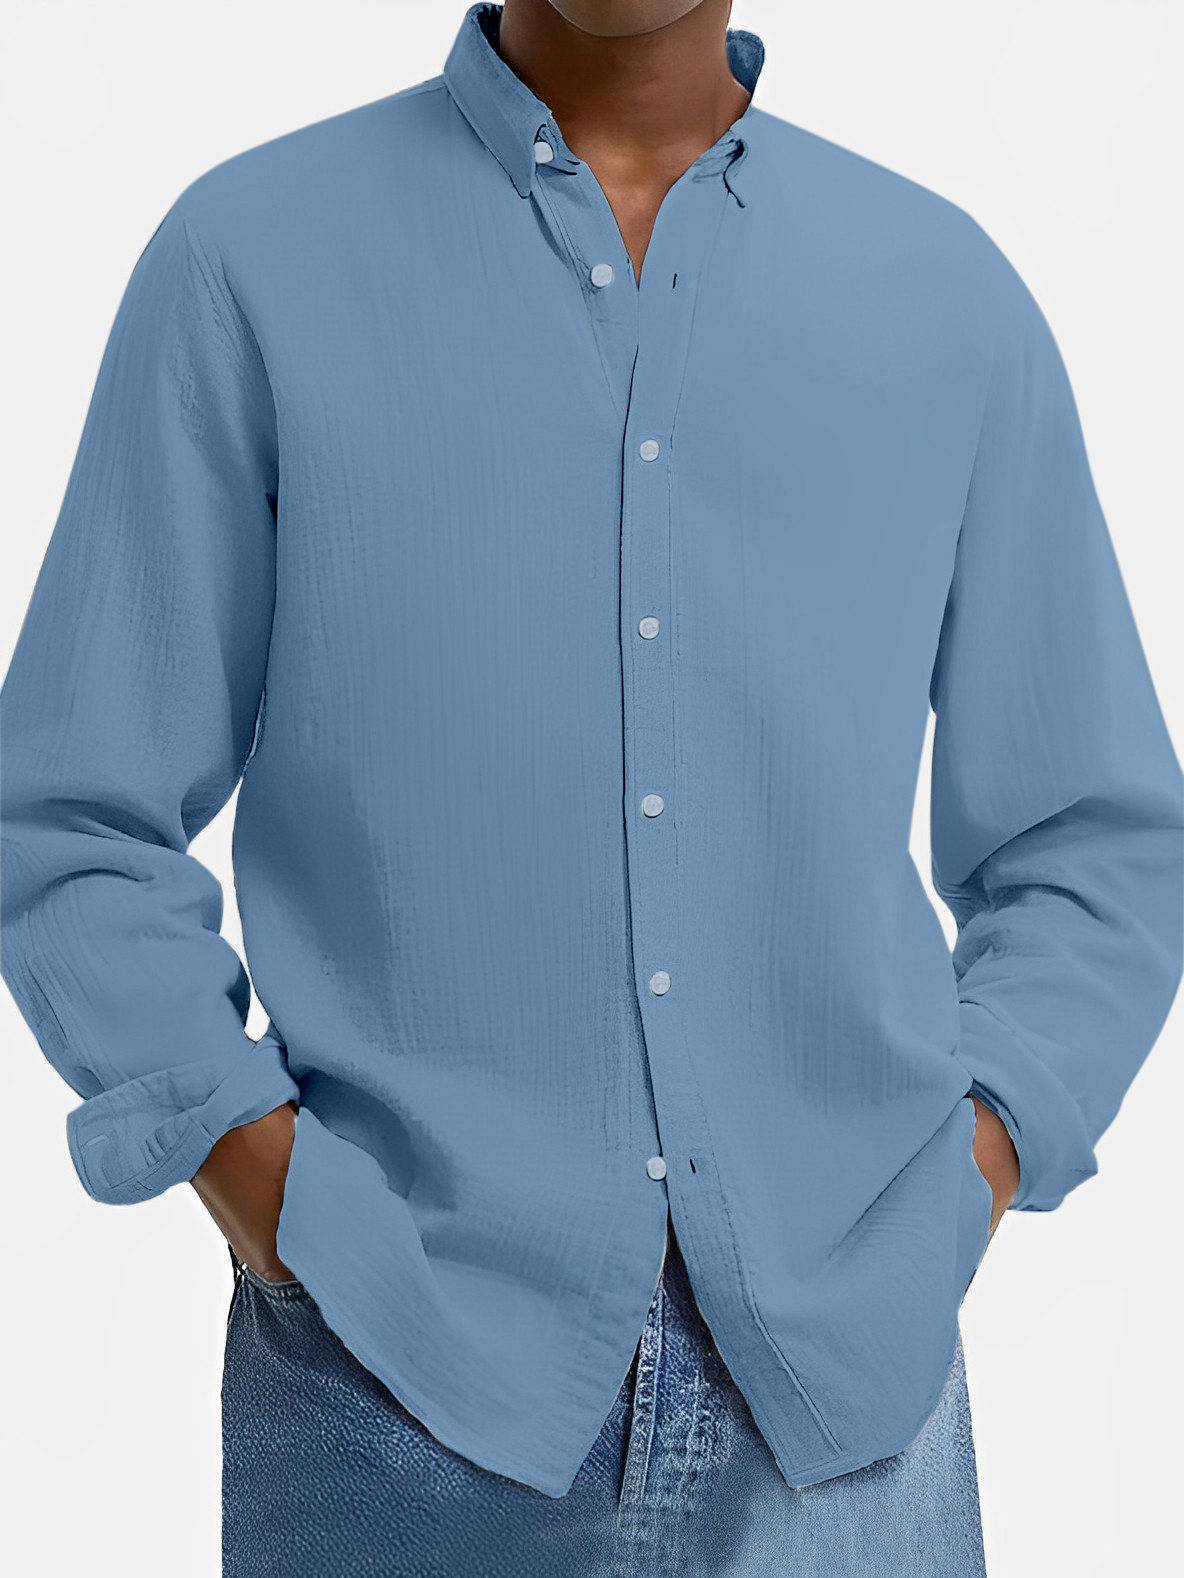 Men's Lapel Cotton And Linen Loose Casual Long-sleeved Shirt